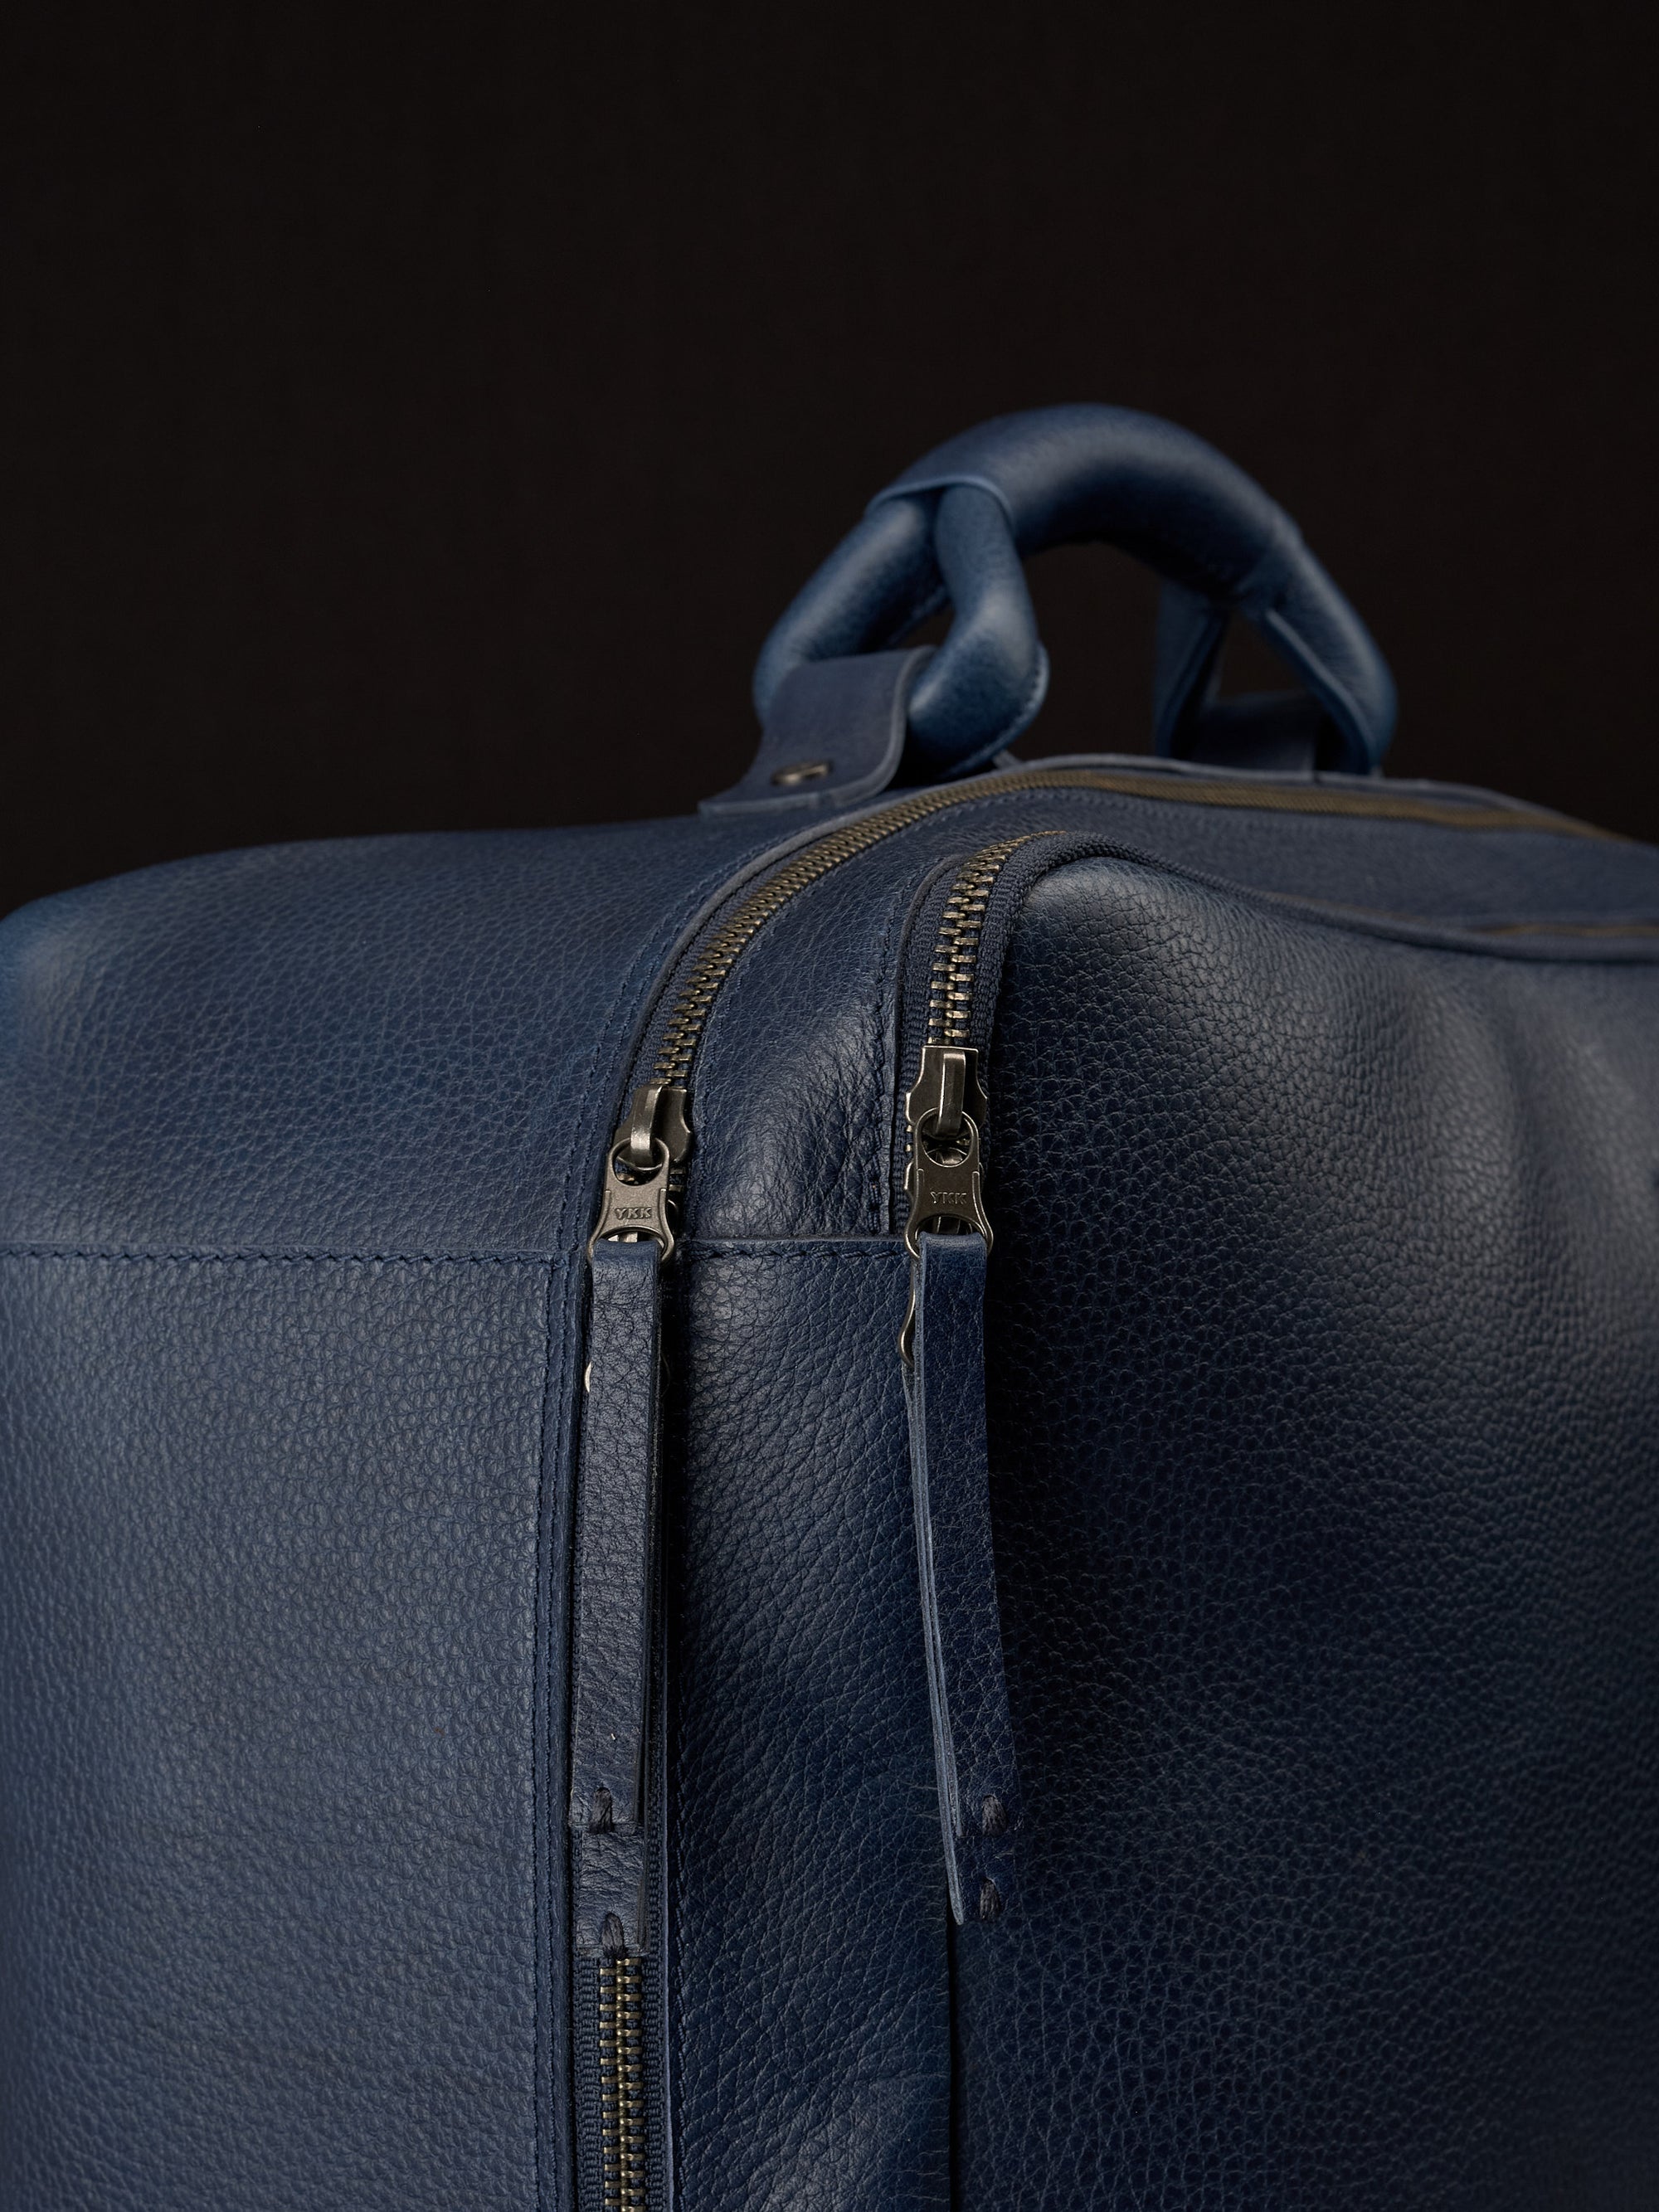 Hand stitched pull tabs designer duffle bag navy by Capa Leather